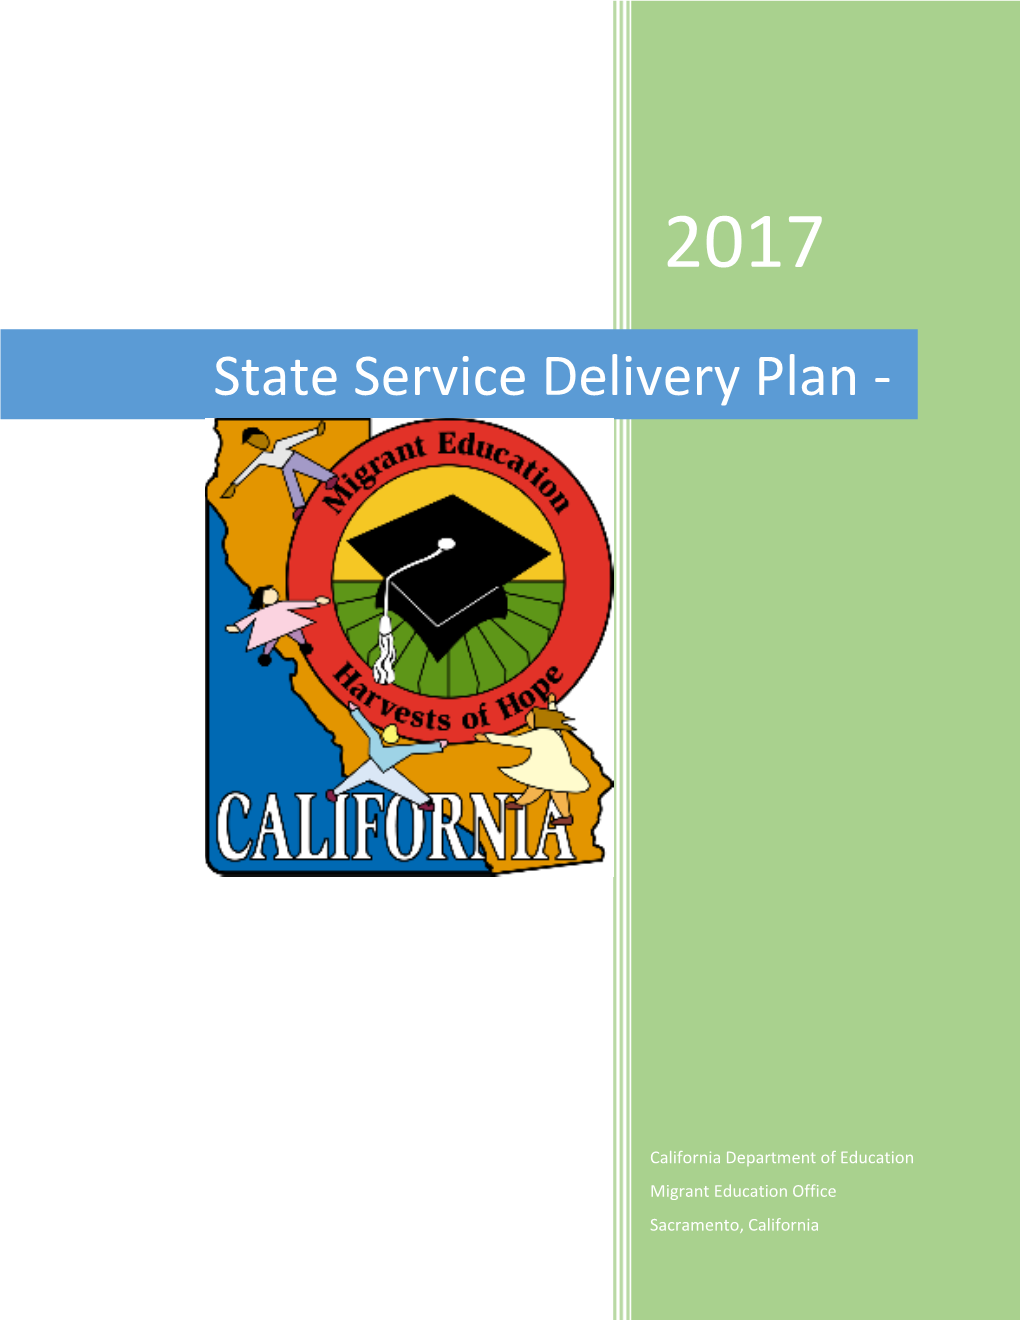 State Service Delivery Plan - Migrant (CA Dept of Education)